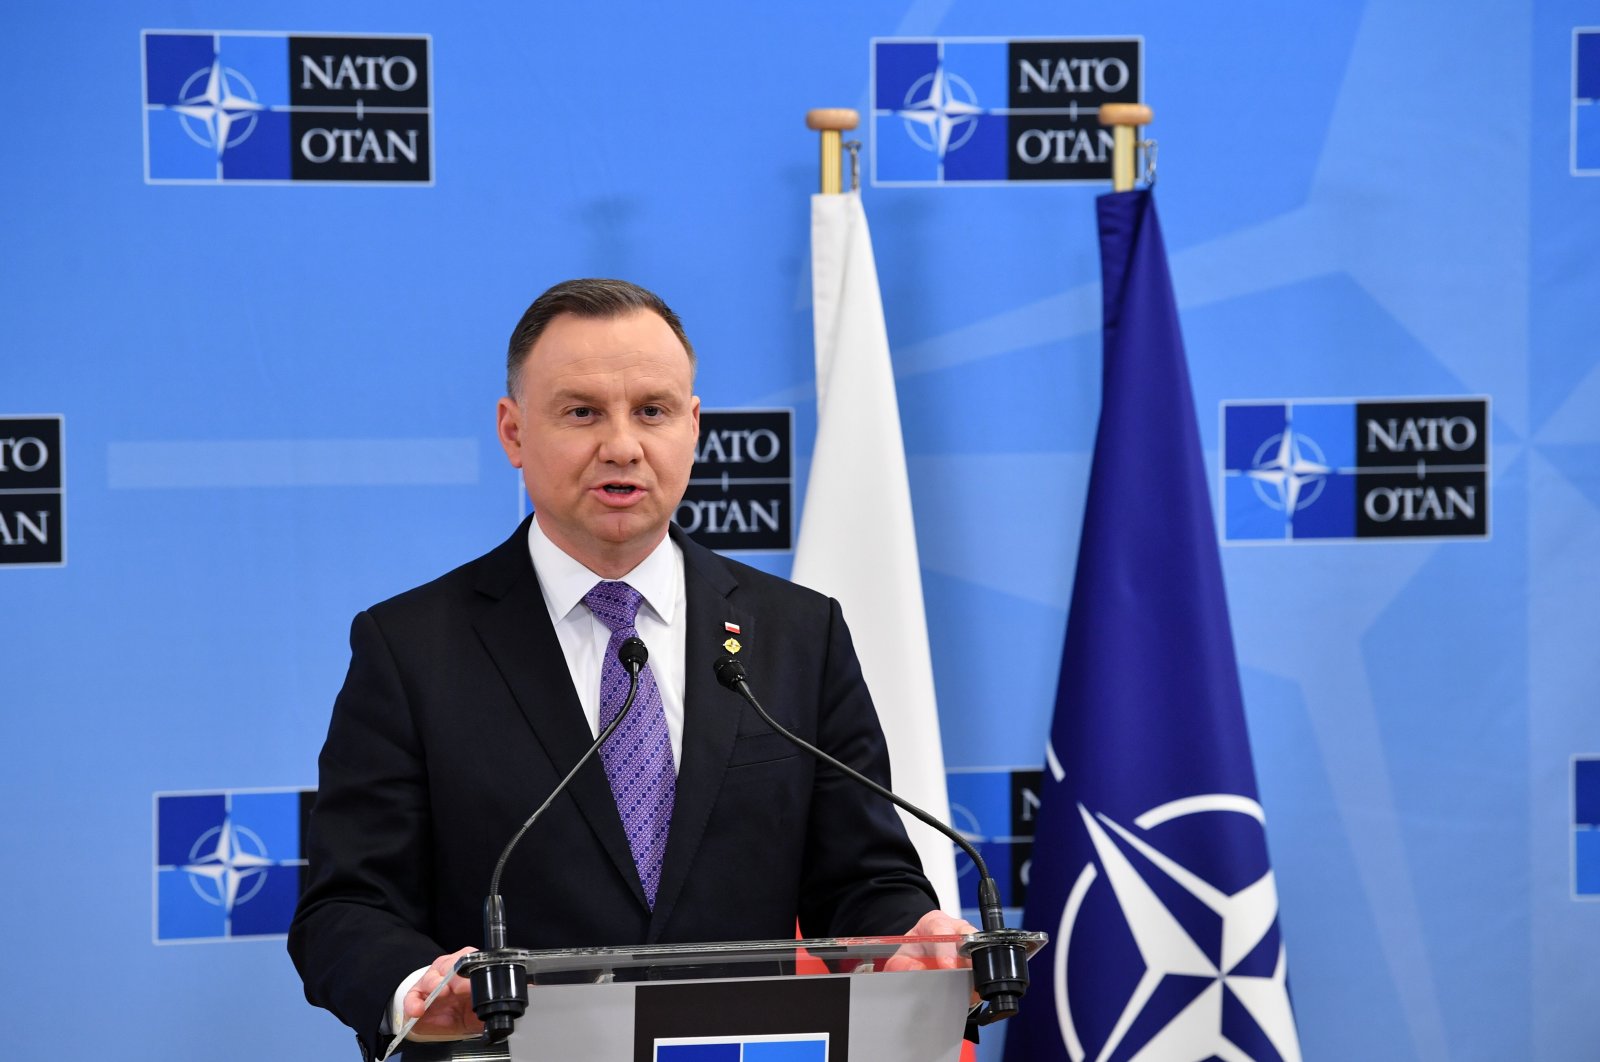 Polish President Andrzej Duda gives a press conference at the end of an extraordinary NATO Summit at the Alliance headquarters in Brussels, Belgium, March 24, 2022. (EPA Photo)